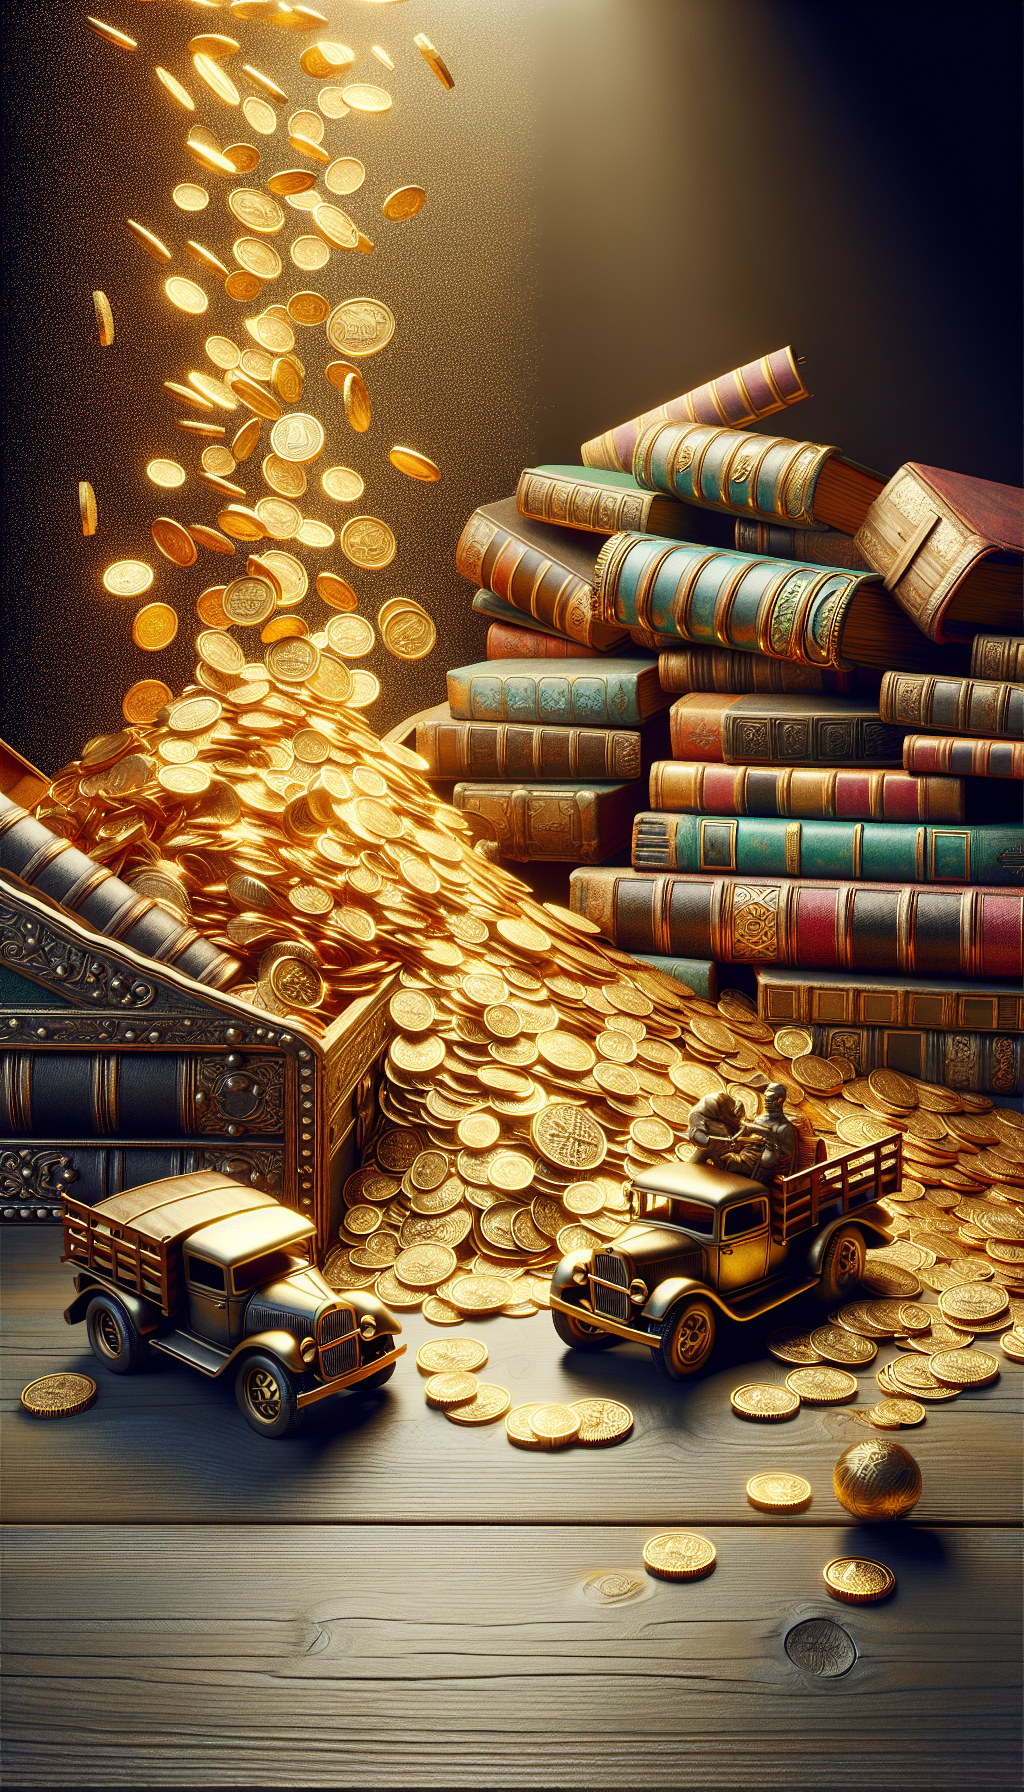 An eclectic treasure trove spills open, with gilded antique books unfurling into a cascade of gold coins, amidst which vintage Tonka toy trucks are perched, as if hauling riches. The image is a blend of line art for the toys, contrasting with photorealistic glowing coins and ornately textured rare book spines, symbolizing the merging of tangible memories and their unforeseen wealth.